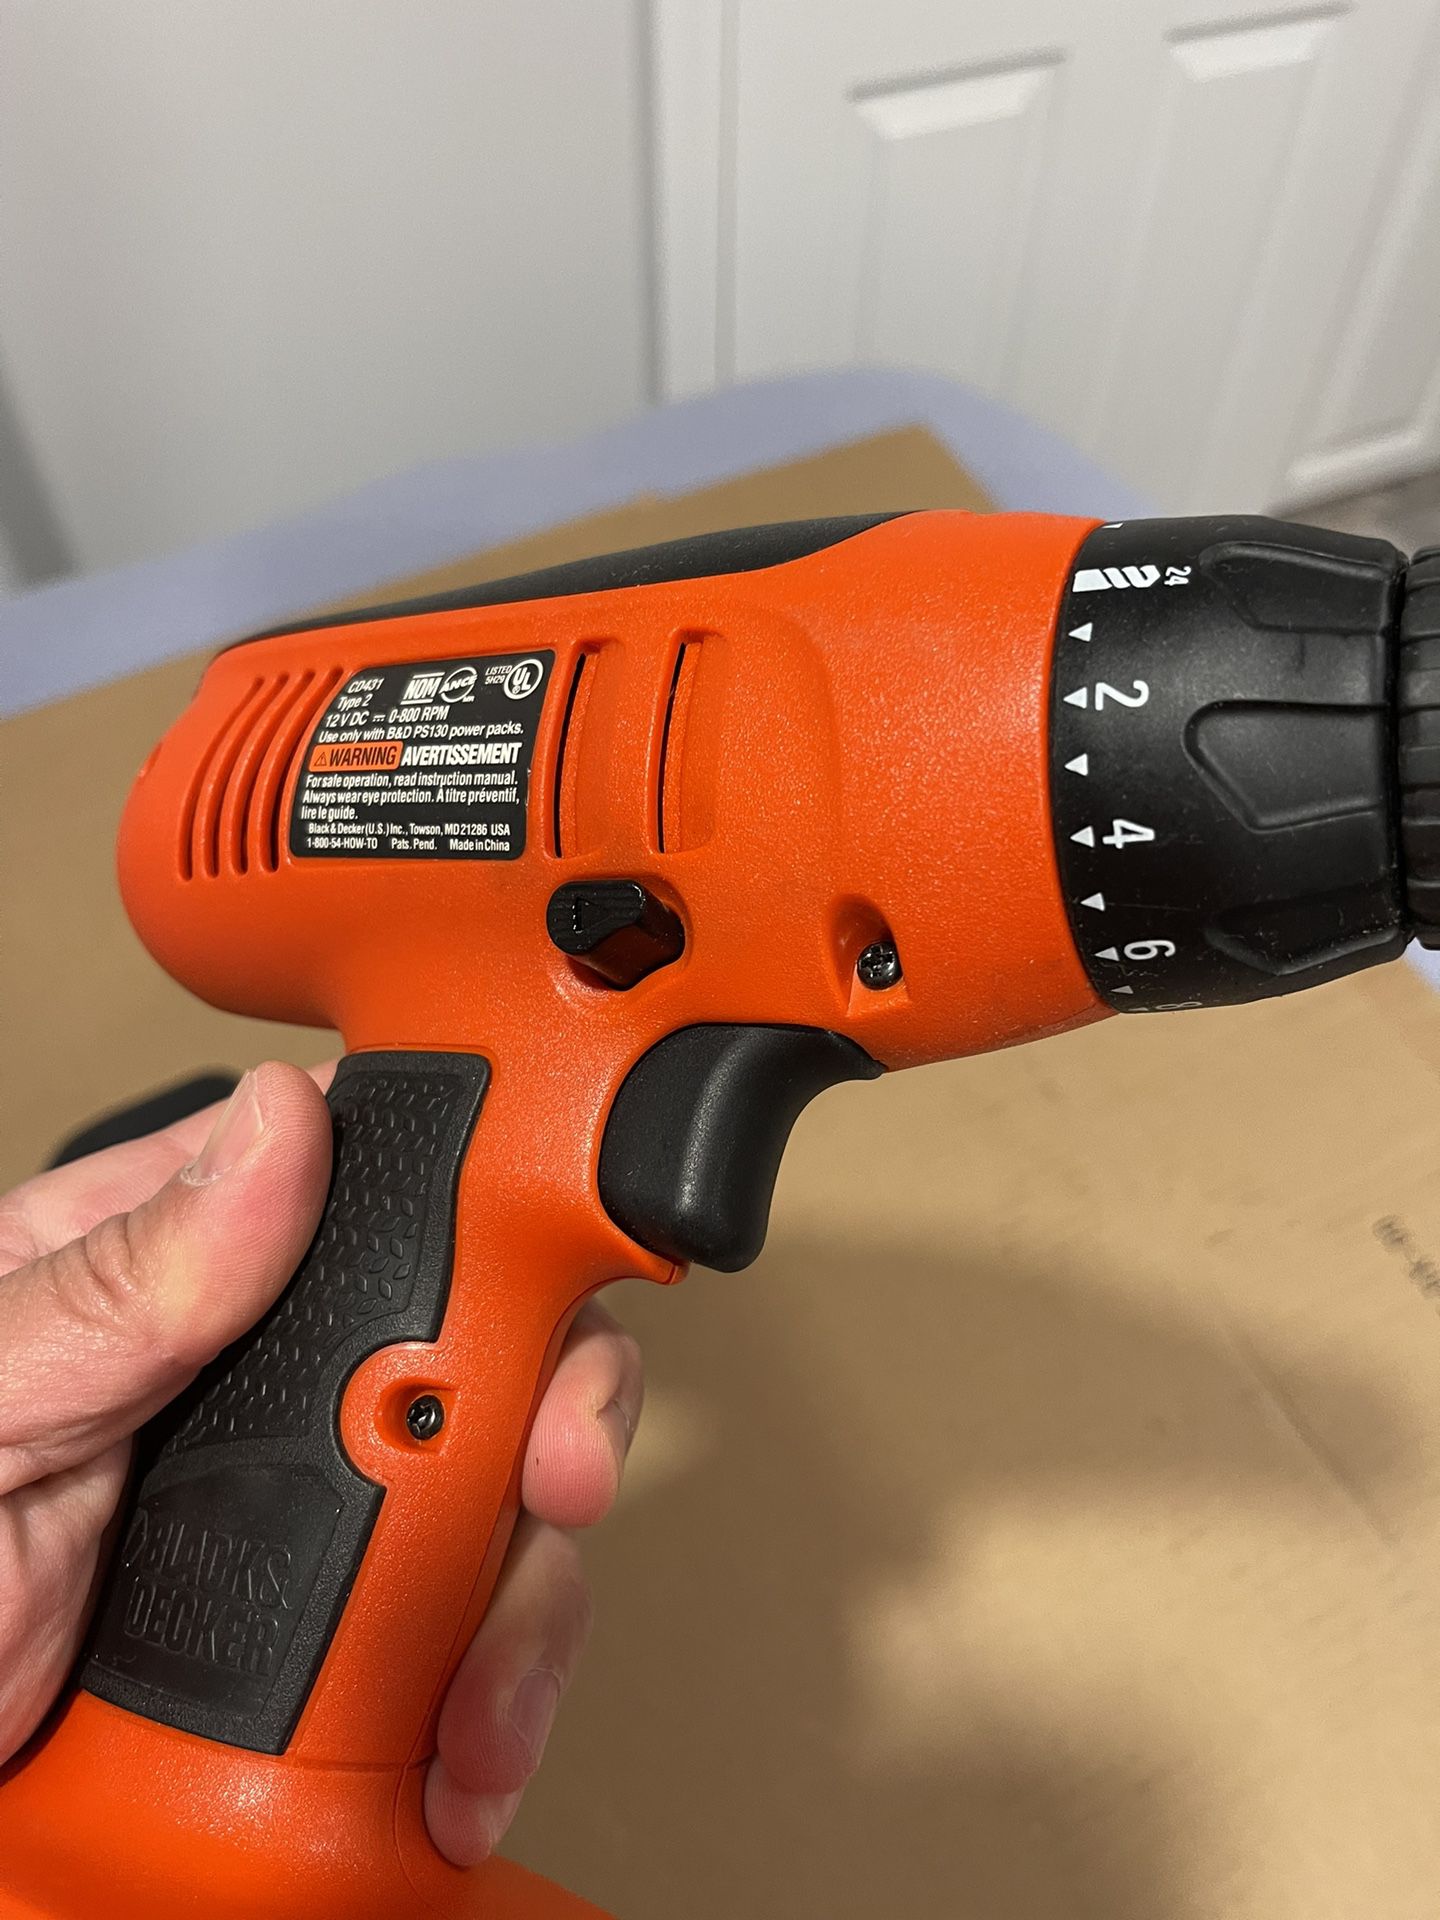 Black and Decker Firestorm ss1800d 18 Volt Drill with Torques (SOLD) for  Sale in Slidell, LA - OfferUp